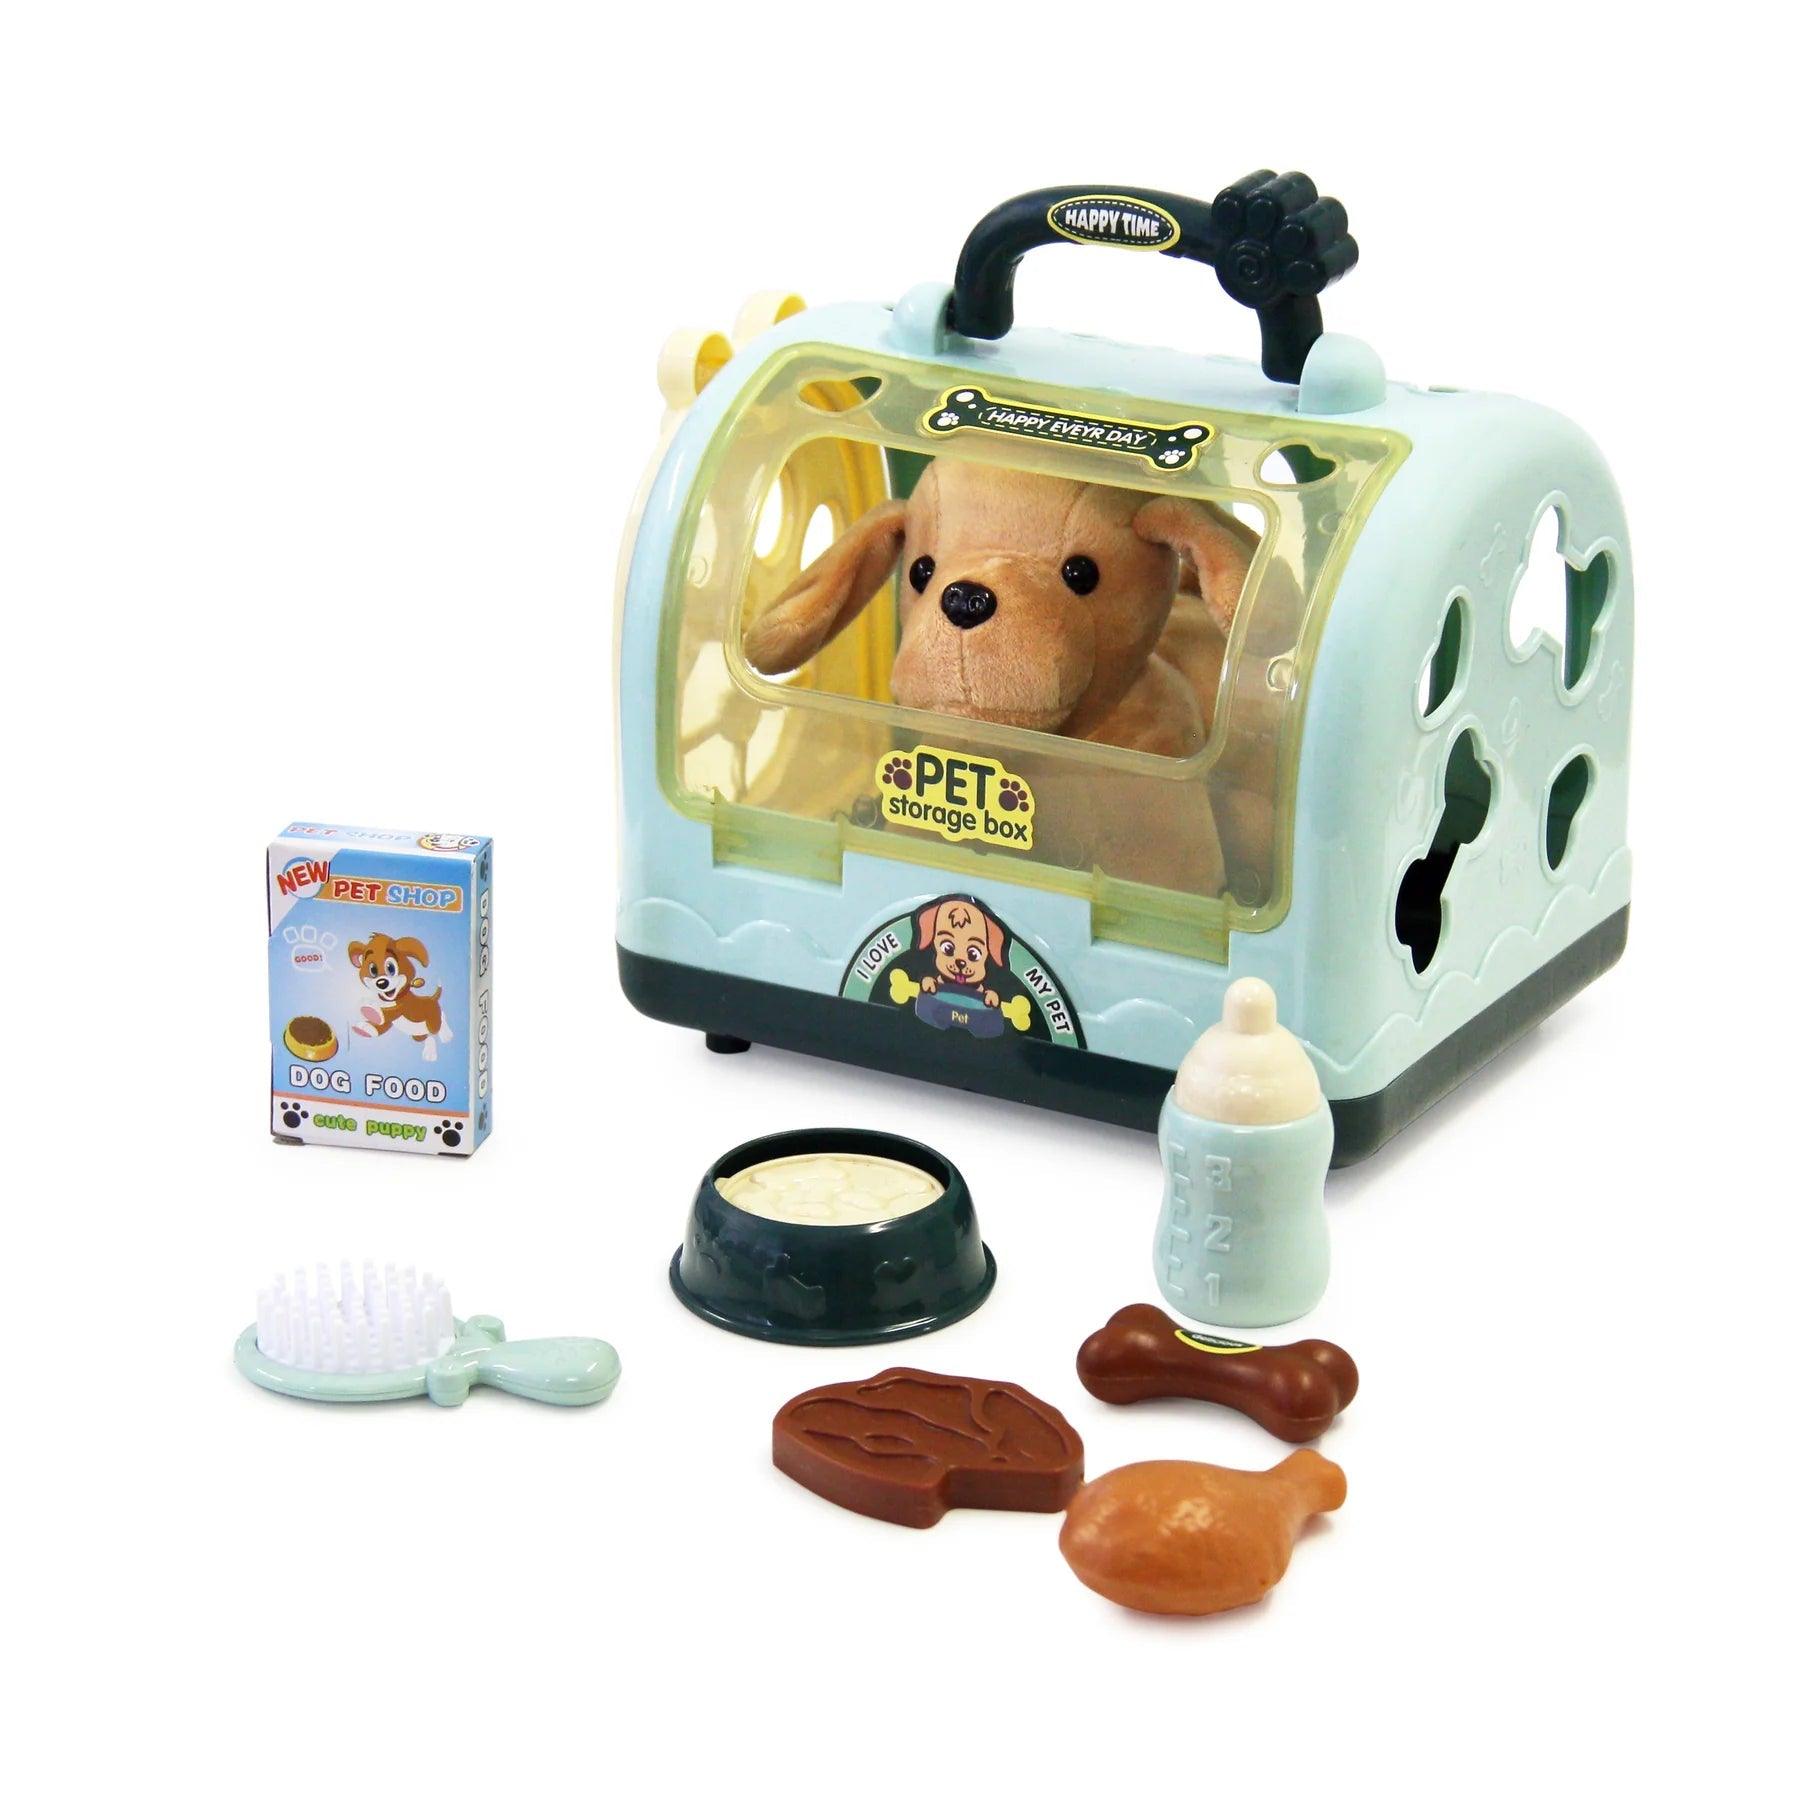 My Puppy Toy Pet Cage - Food Edition - 4aKid